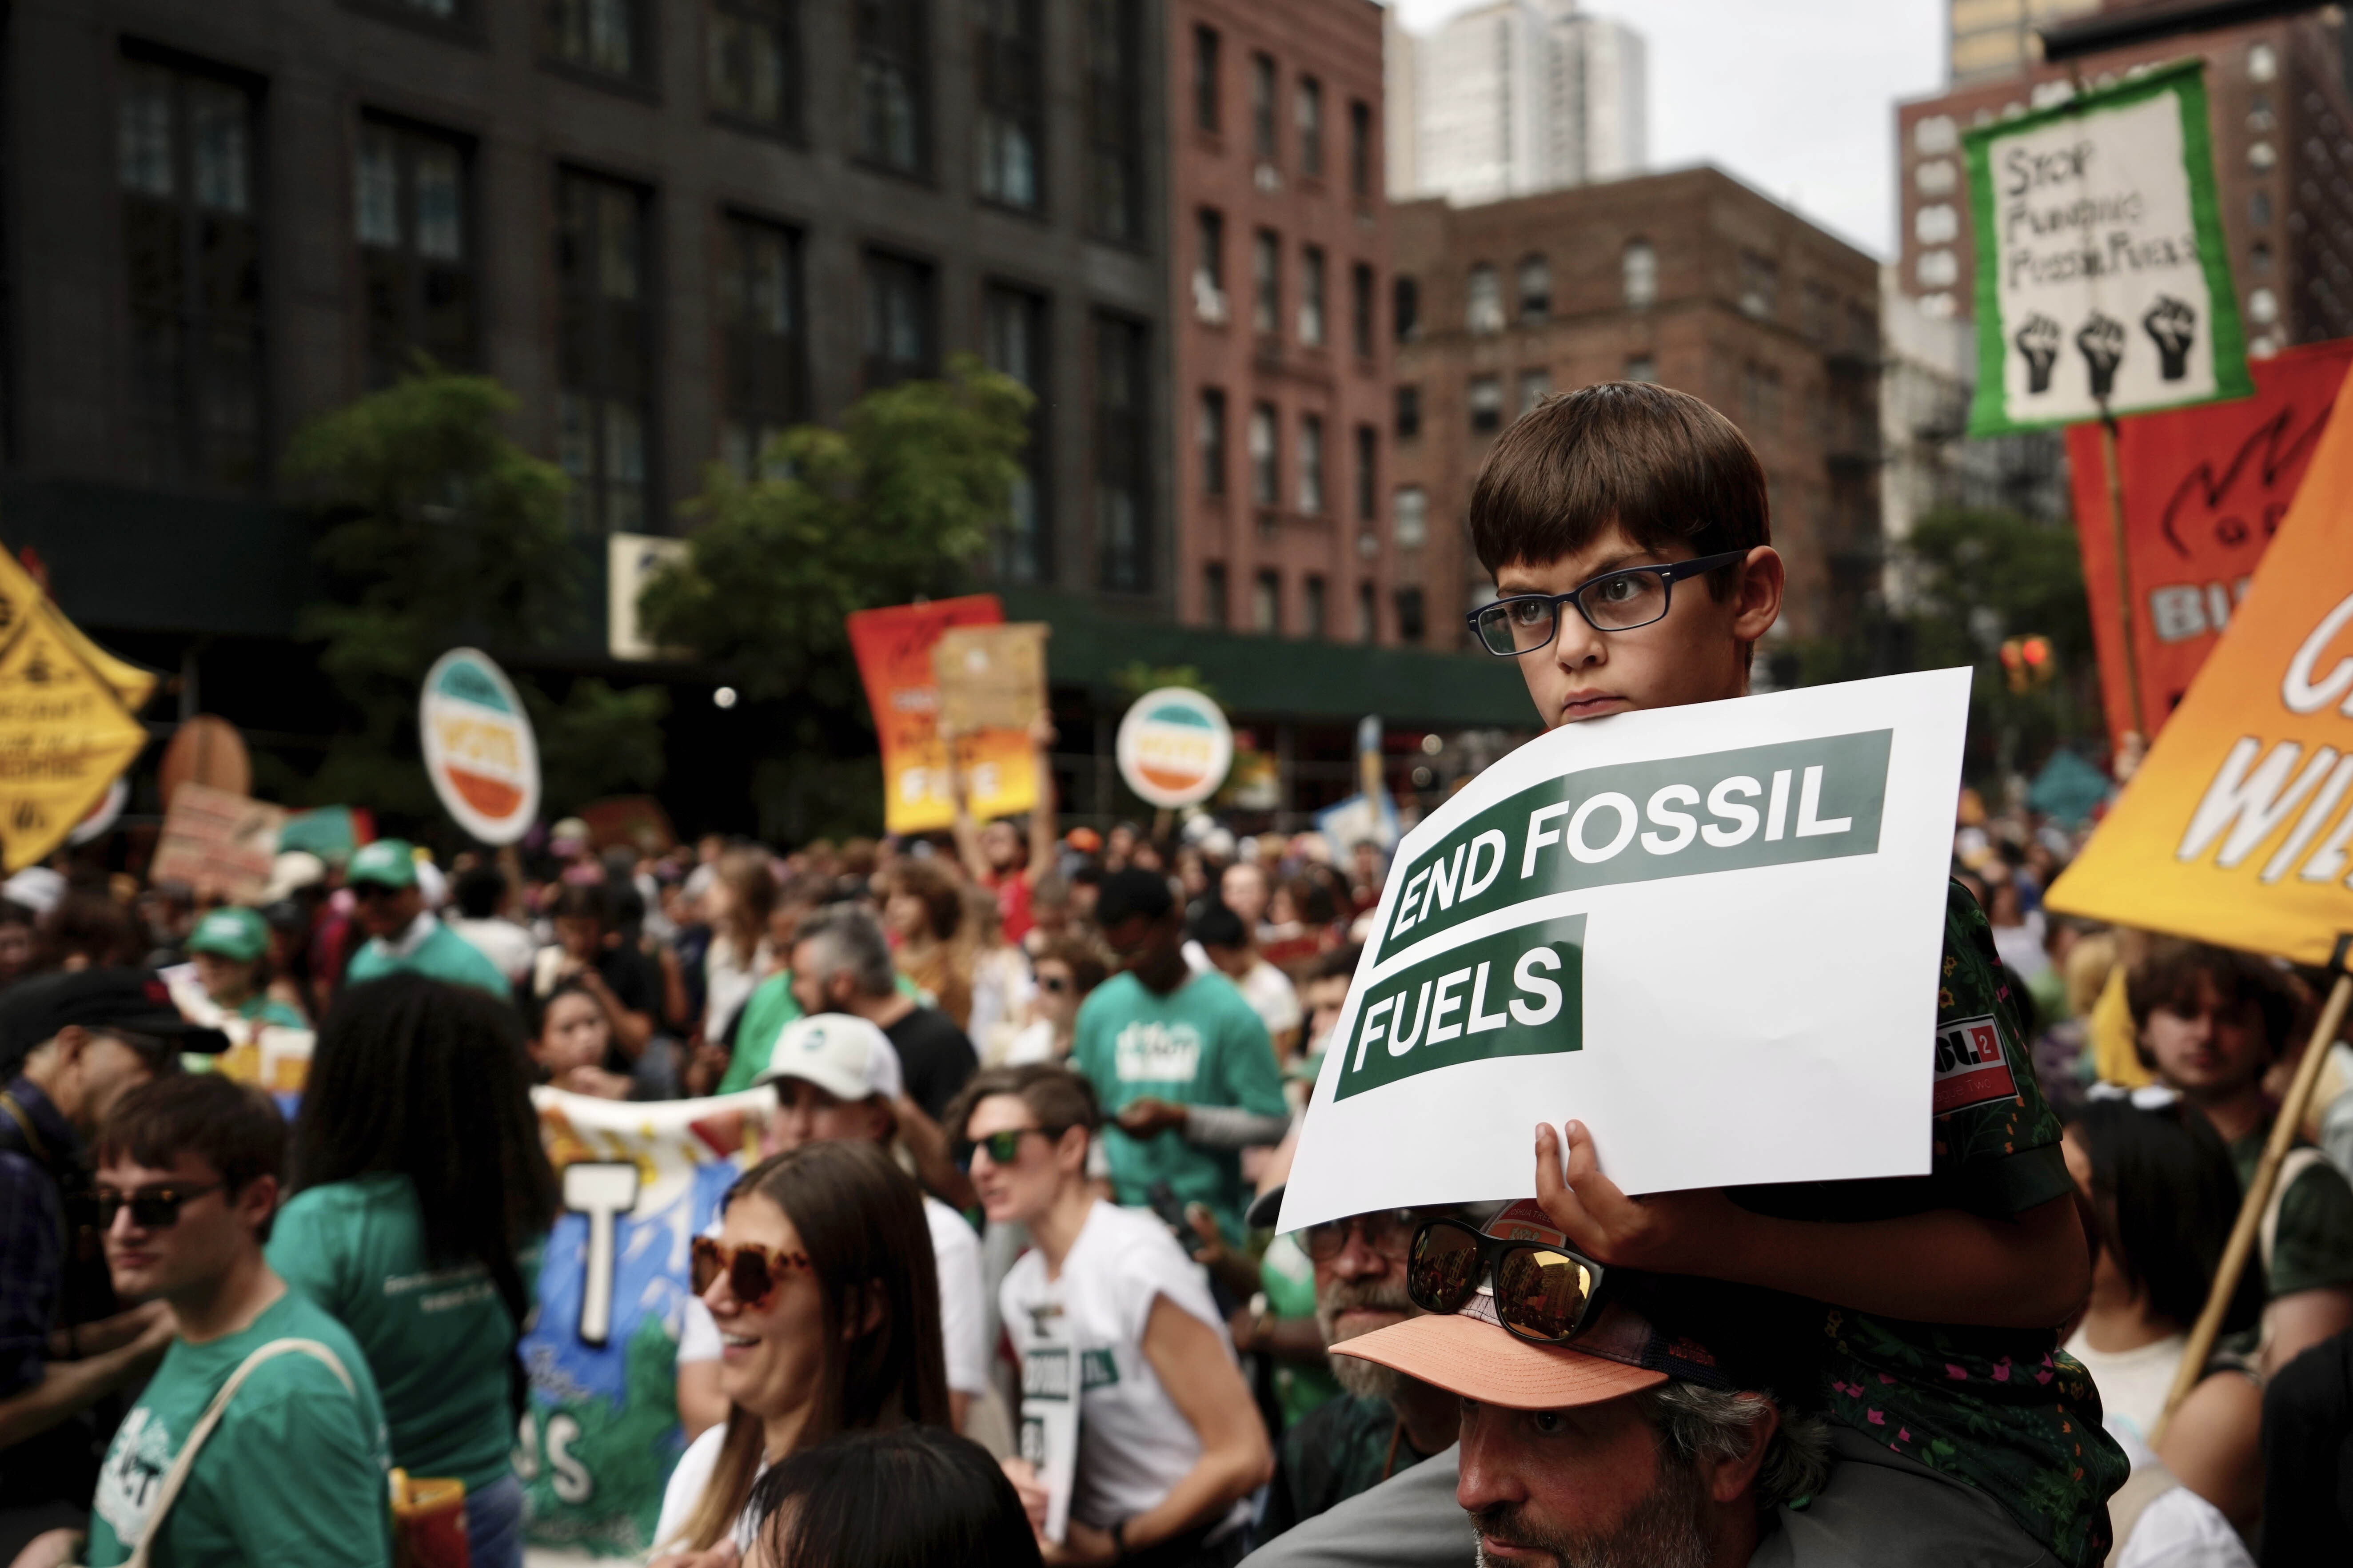 Tens of Thousands Protest For an End to Fossil Fuels As World Leaders Gather in New York